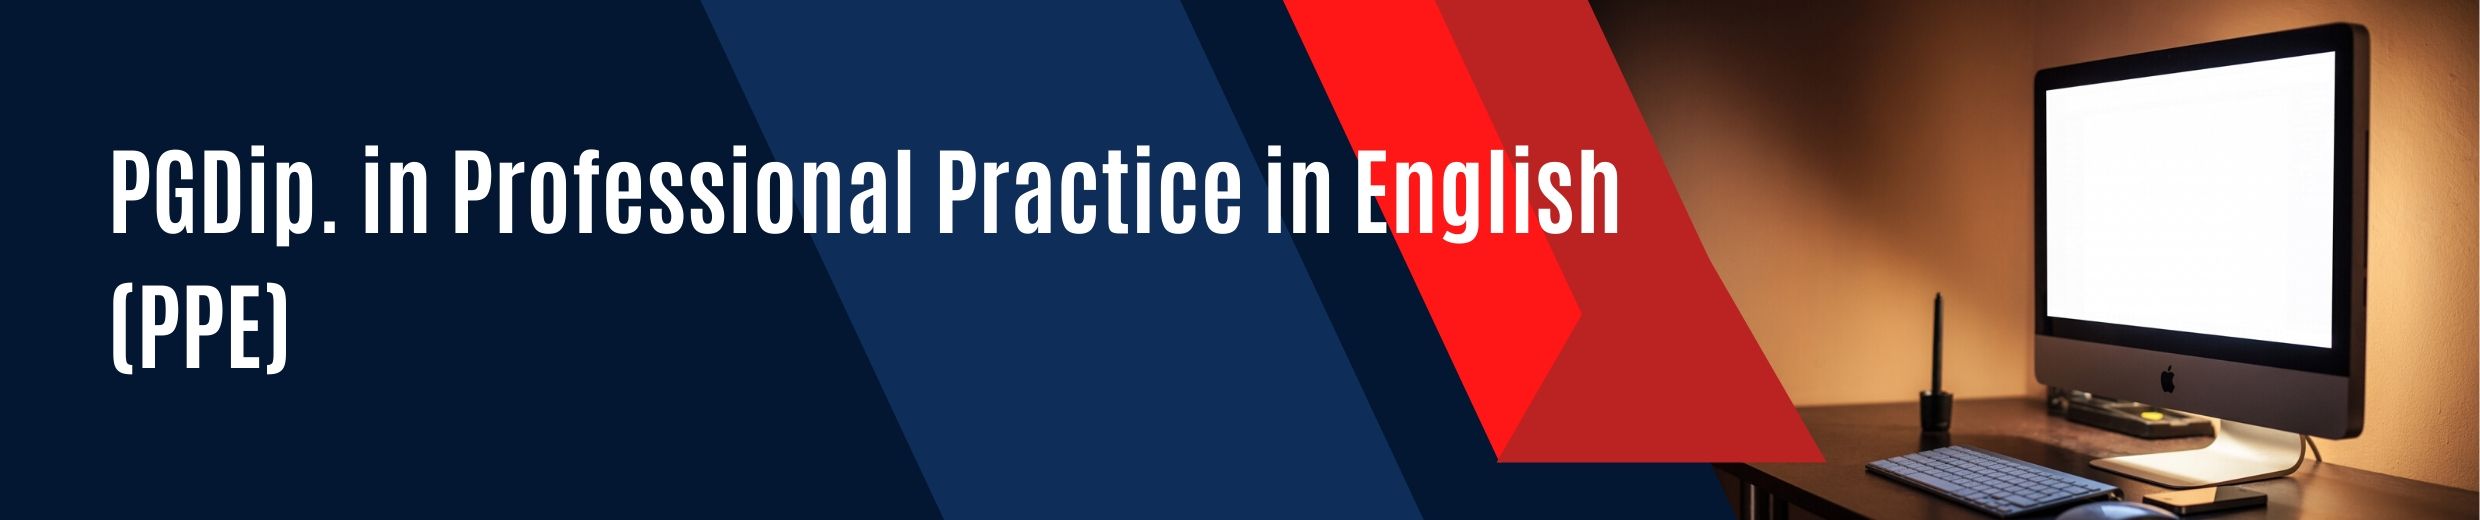 Postgraduate Diploma in Professional Practice in English (PGDip PPE)